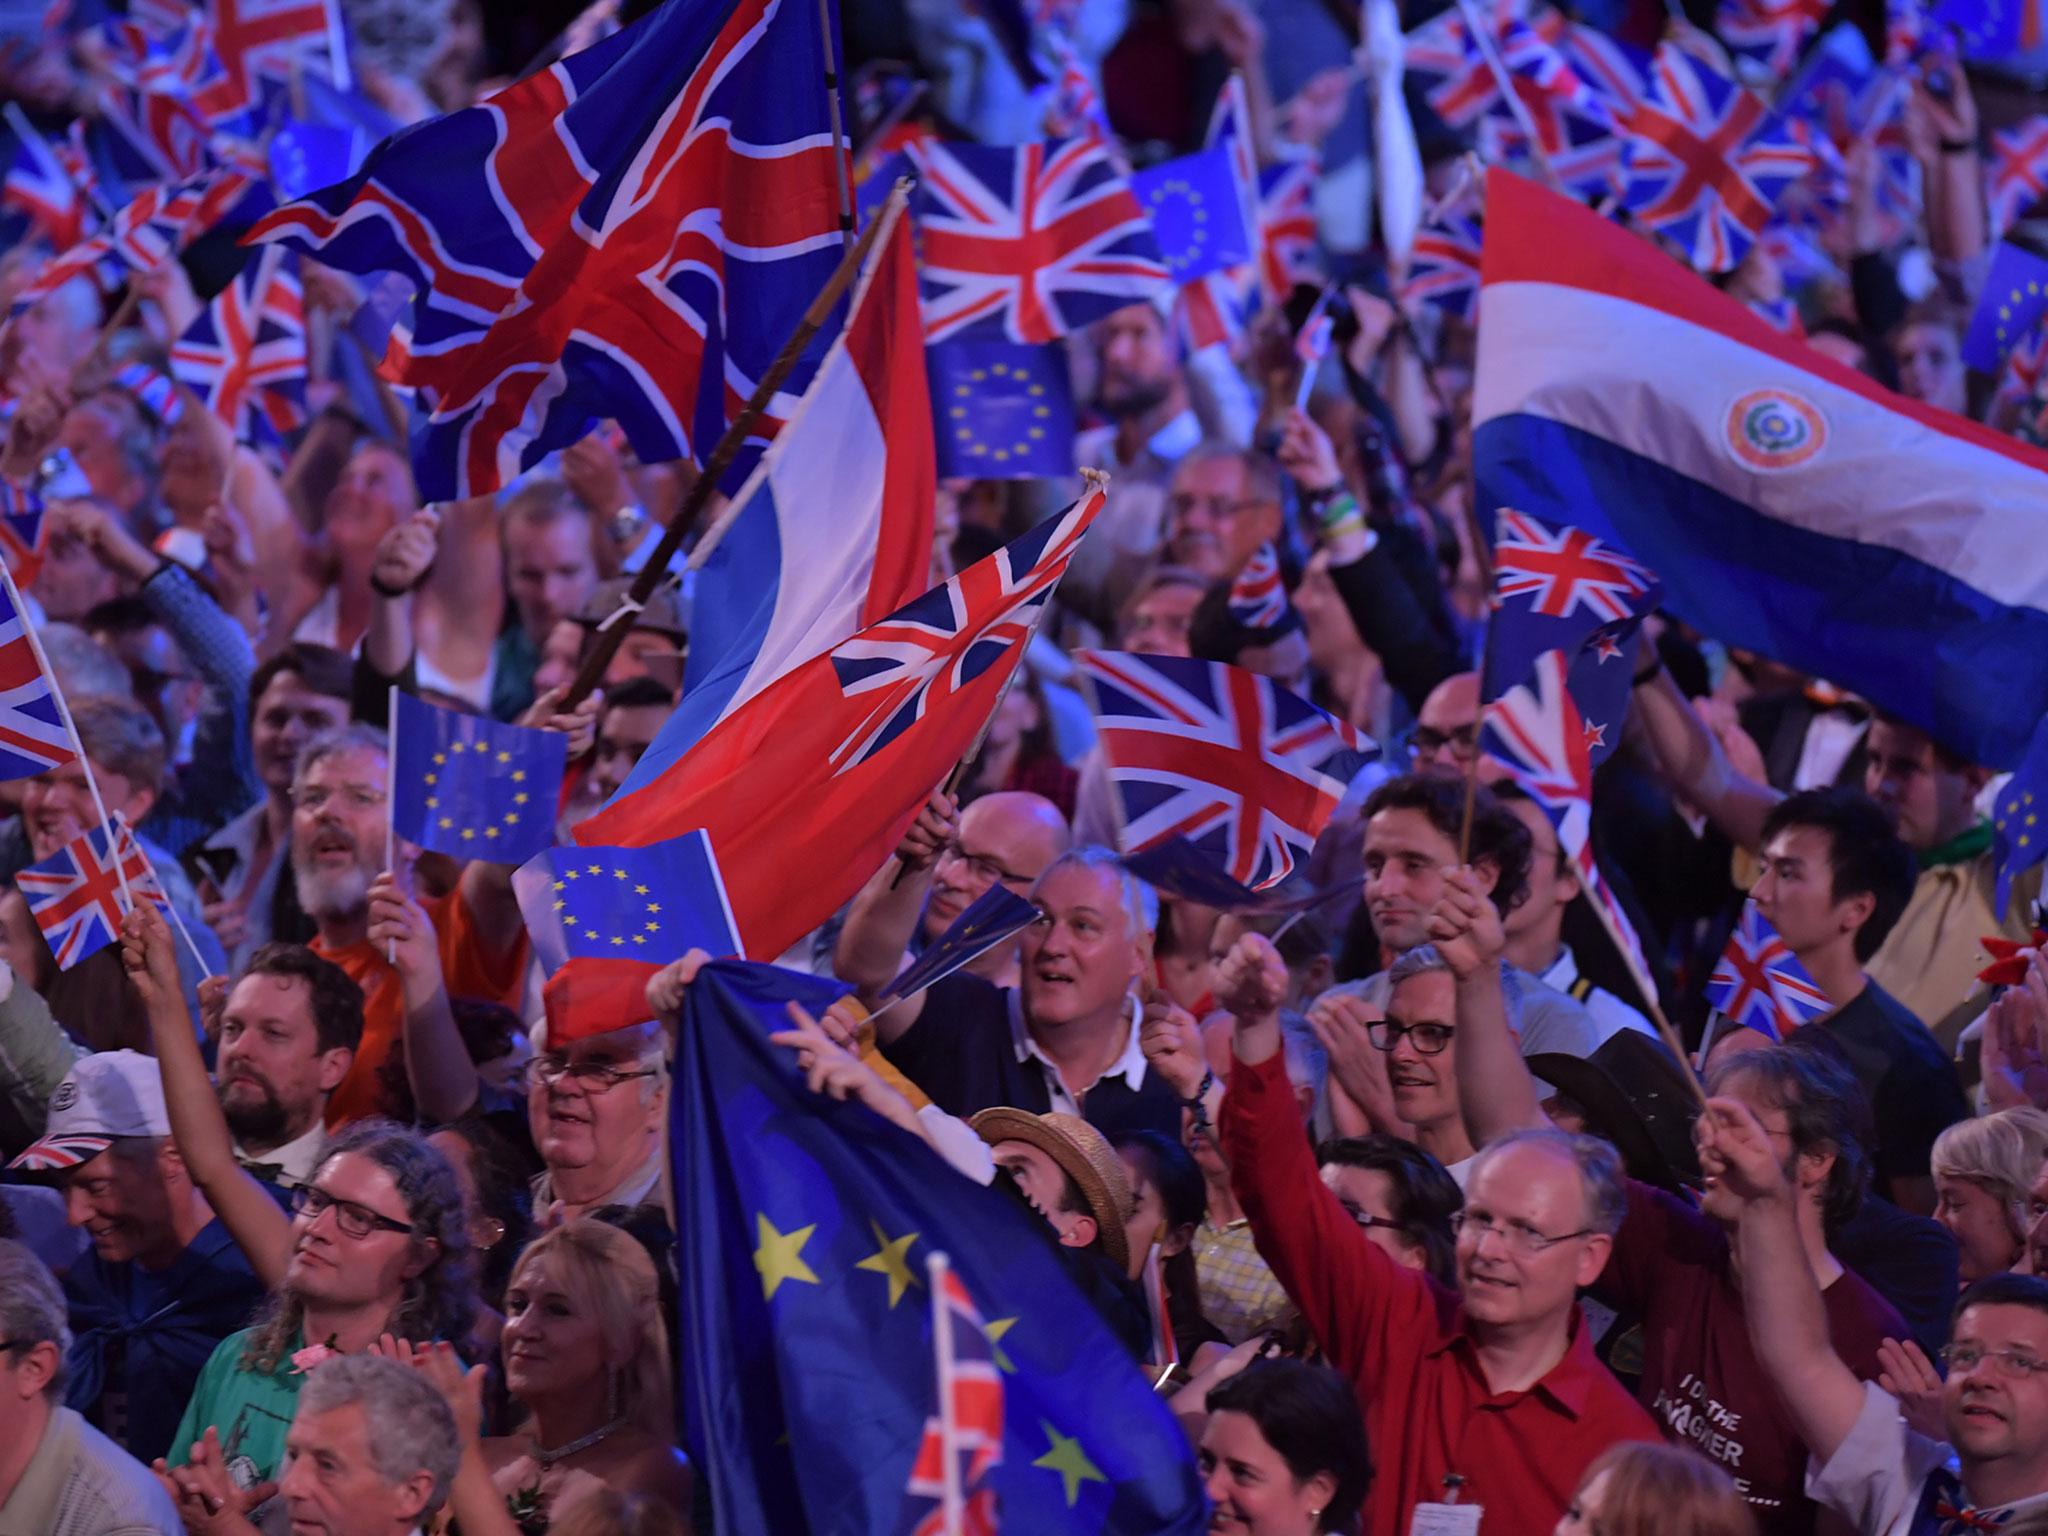 The audience at 2016’s Last Night of the Proms at the Royal Albert Hall